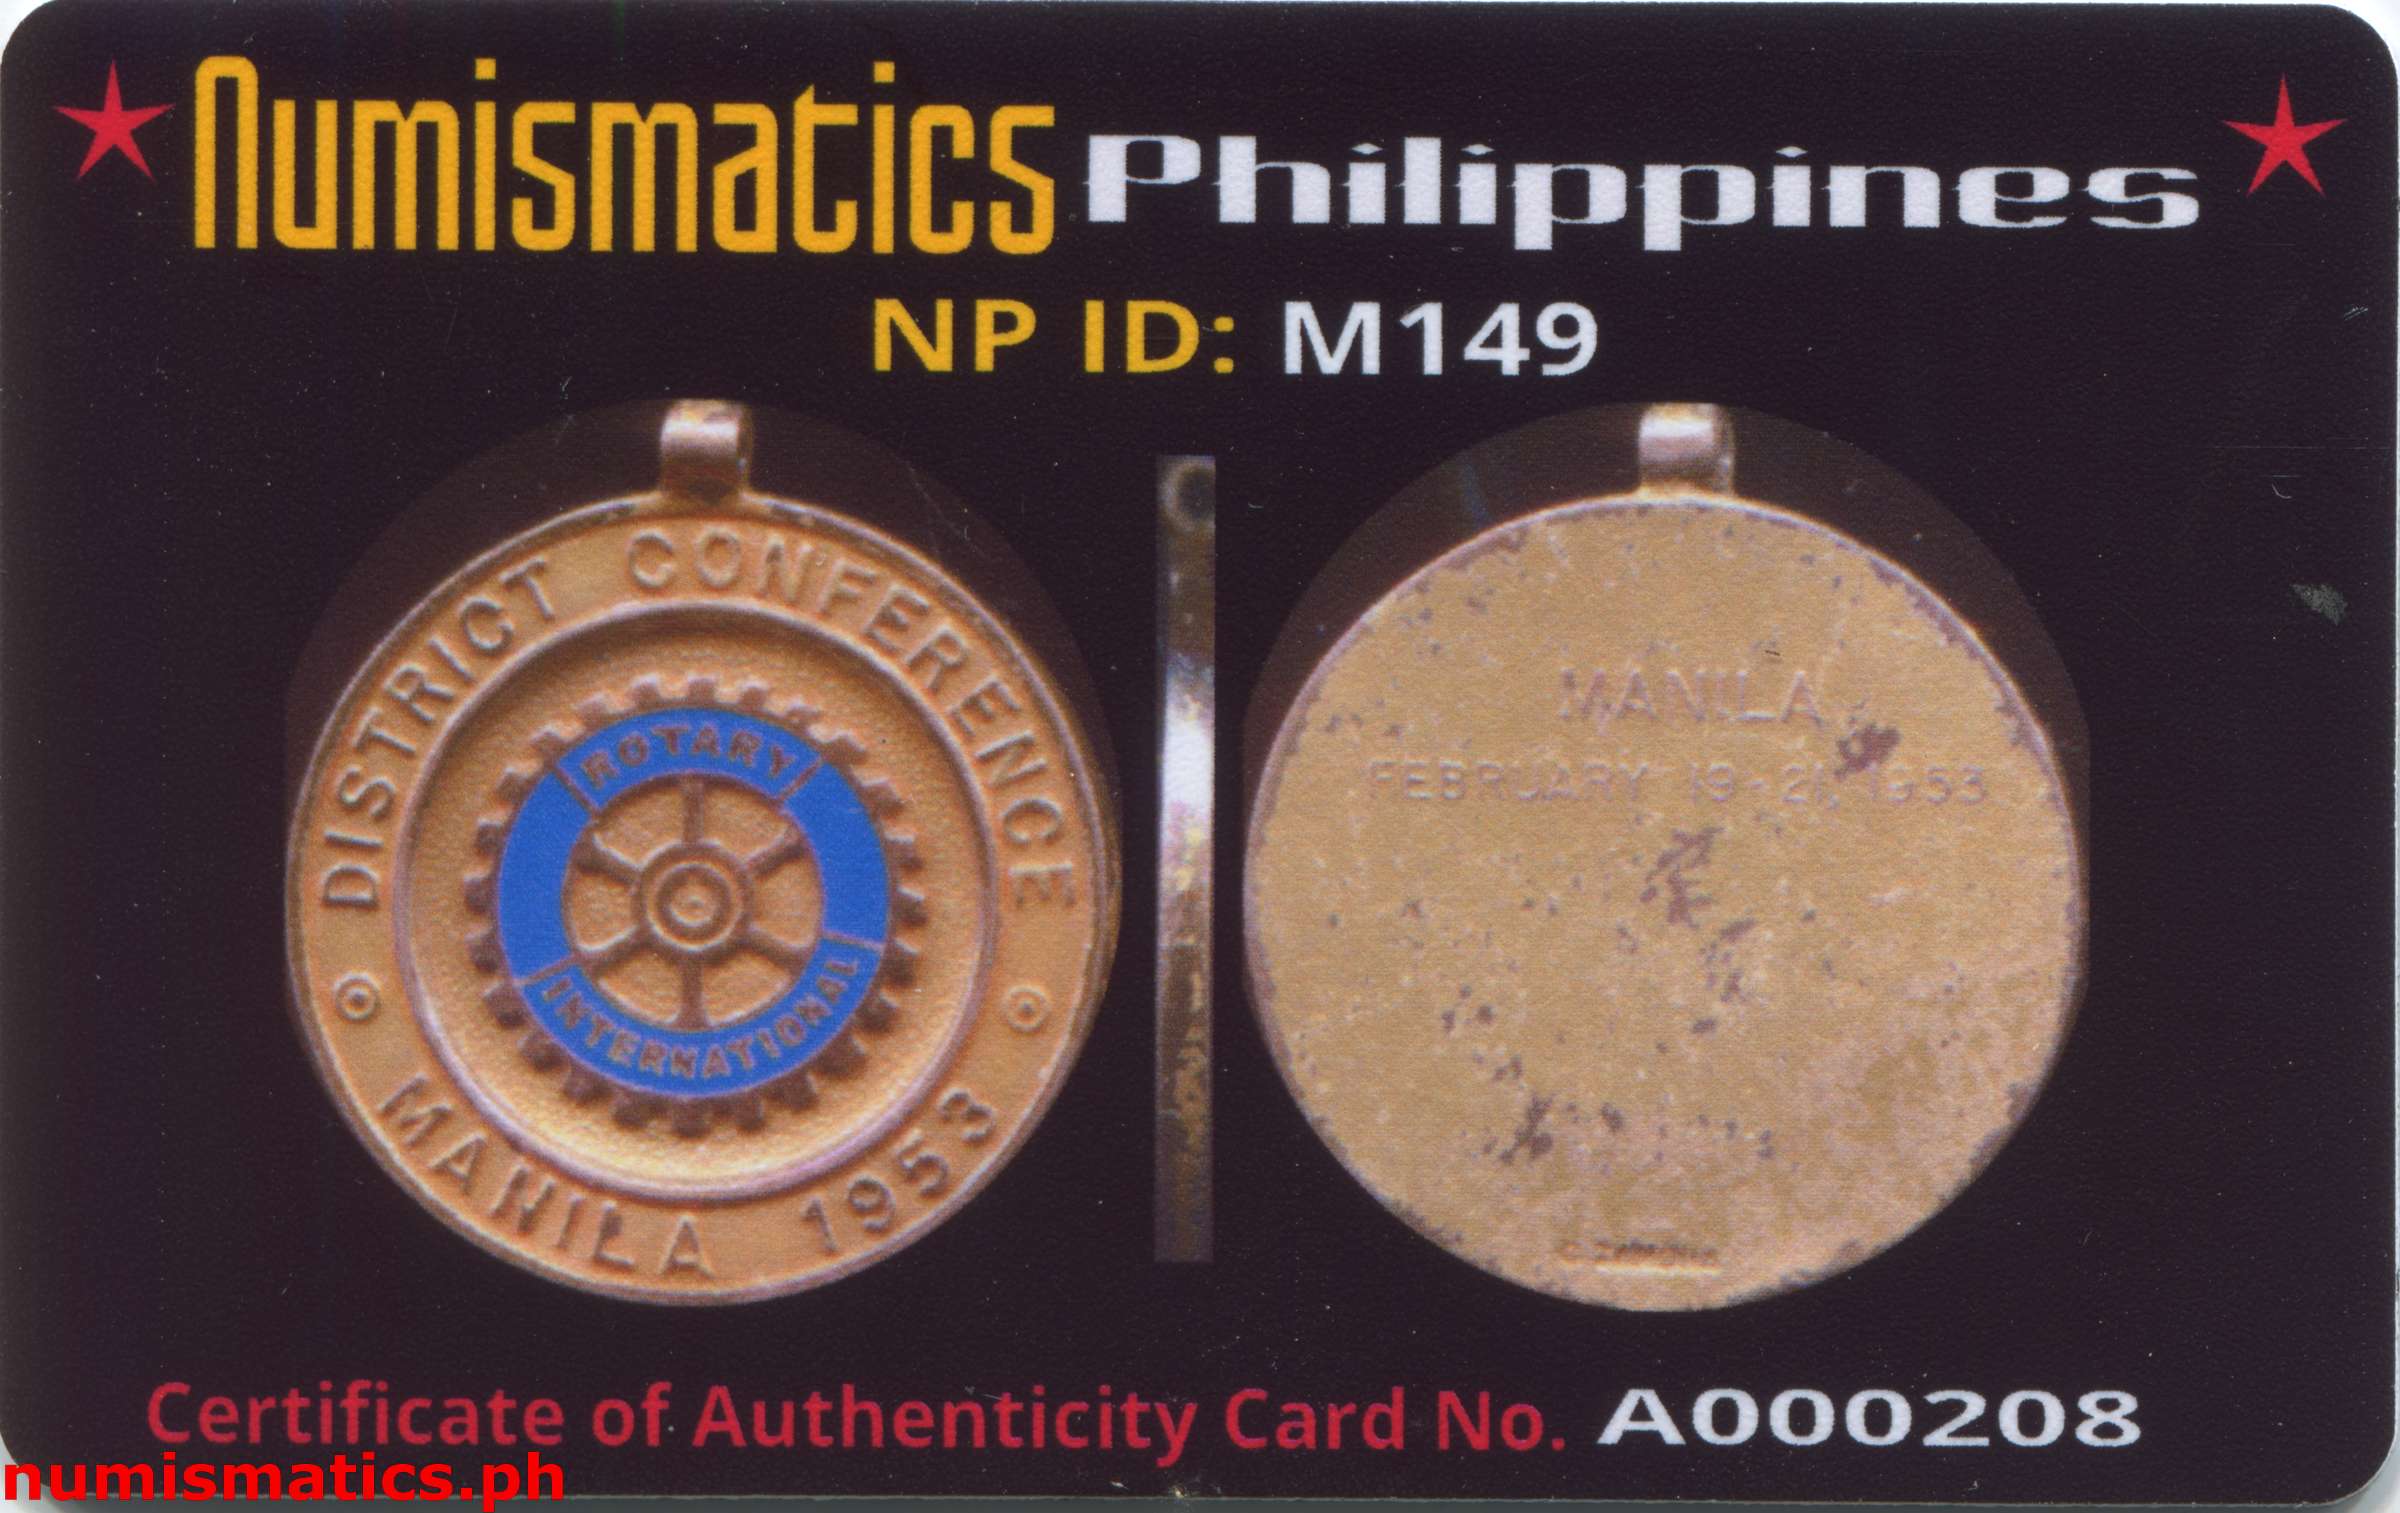 1953 Rotary International Manila District Conference Medal A000208 COA Card Obverse